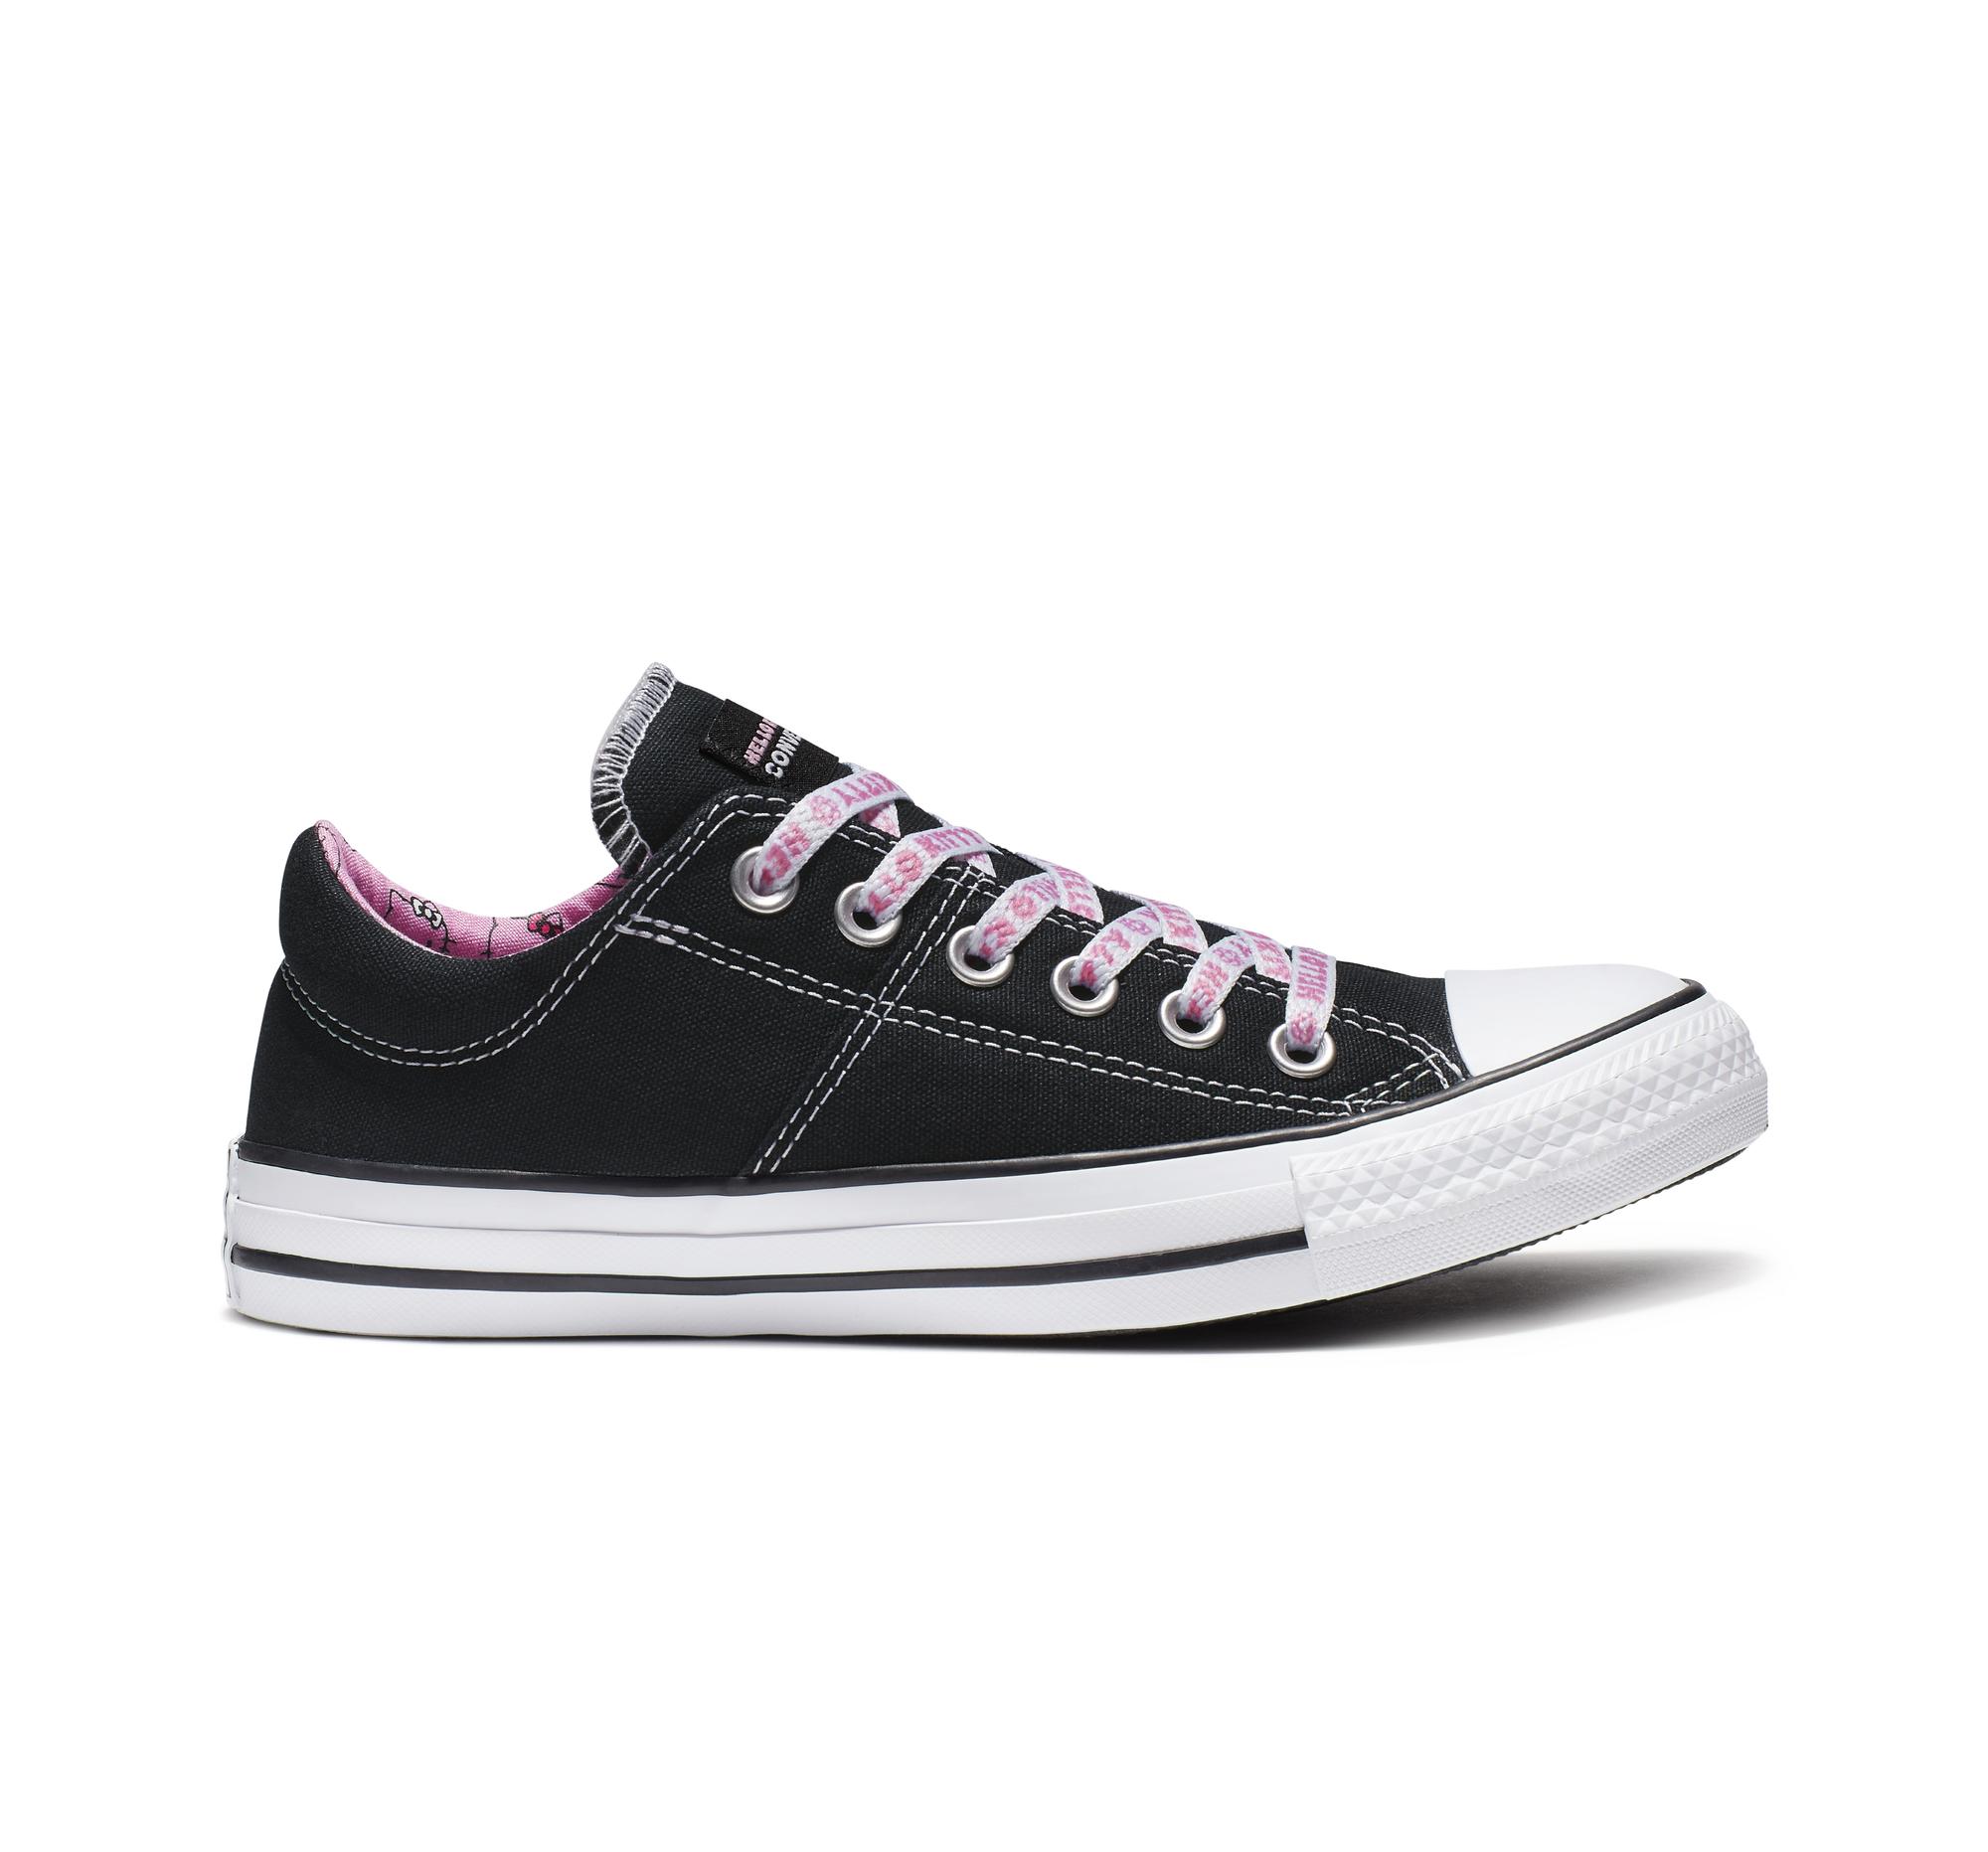 Converse X Hello Kitty Chuck Taylor All Star Madison Low Top in Black | Lyst